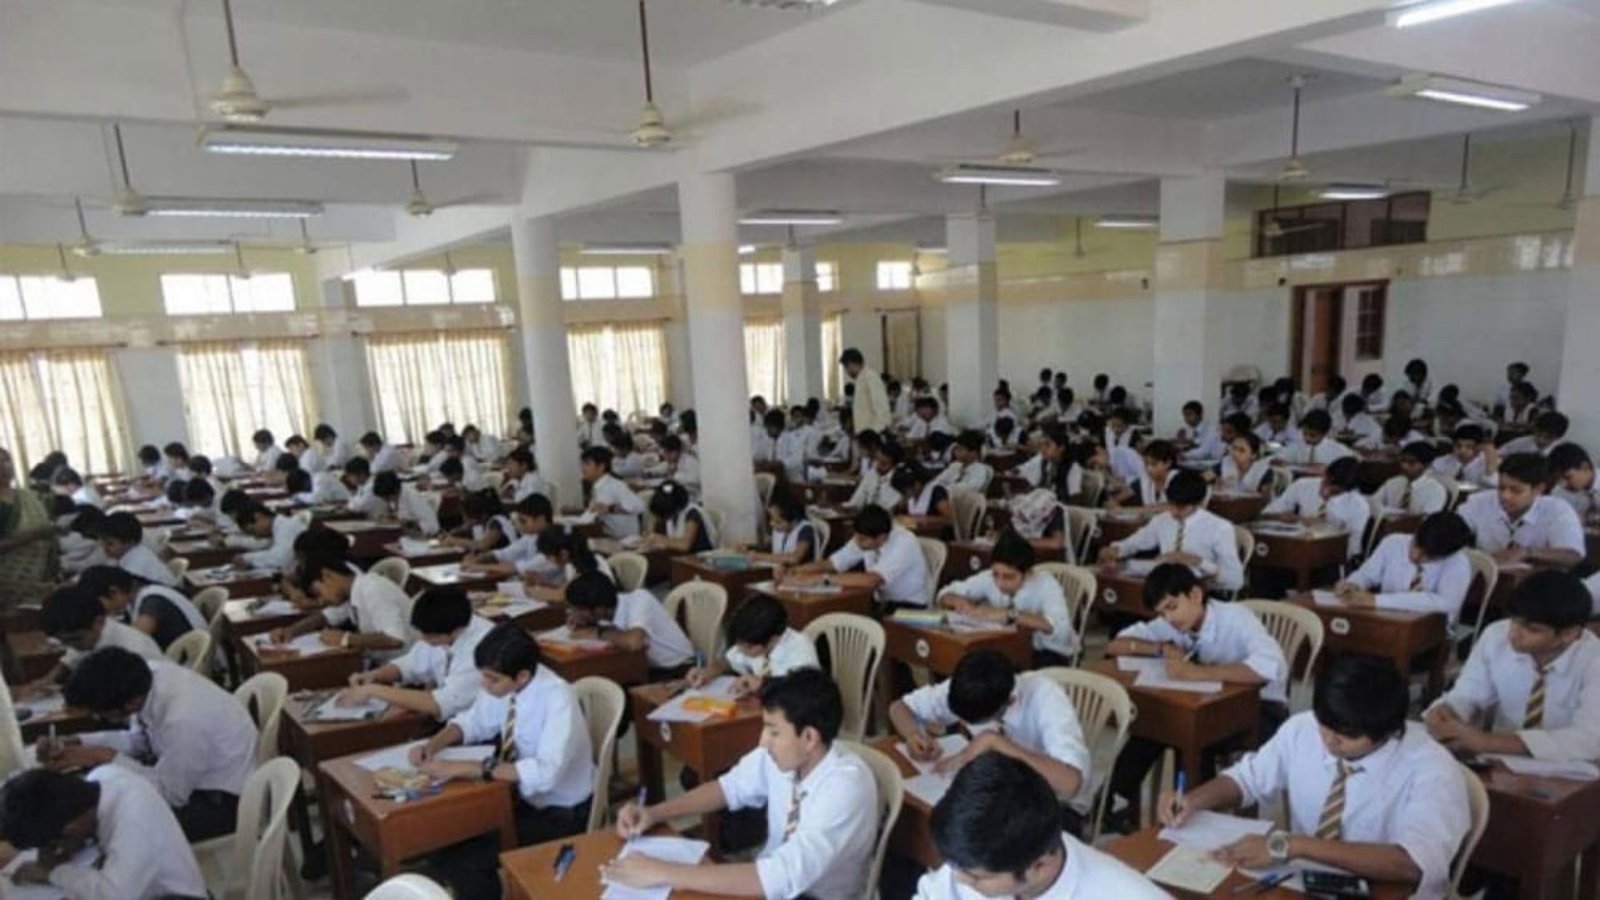 Board exams rescheduled in AJK due to tense situation